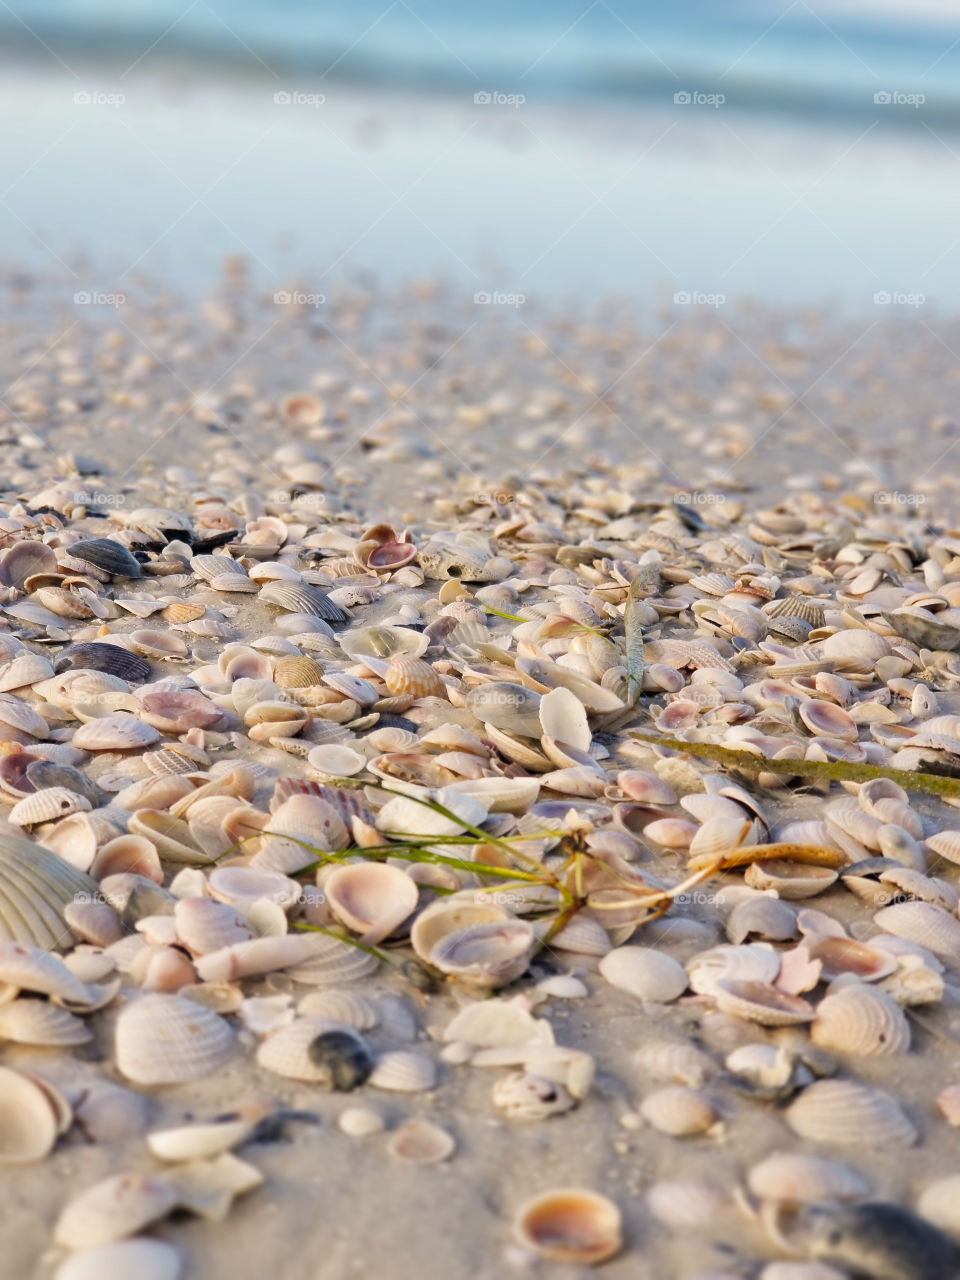 too many seashells to count